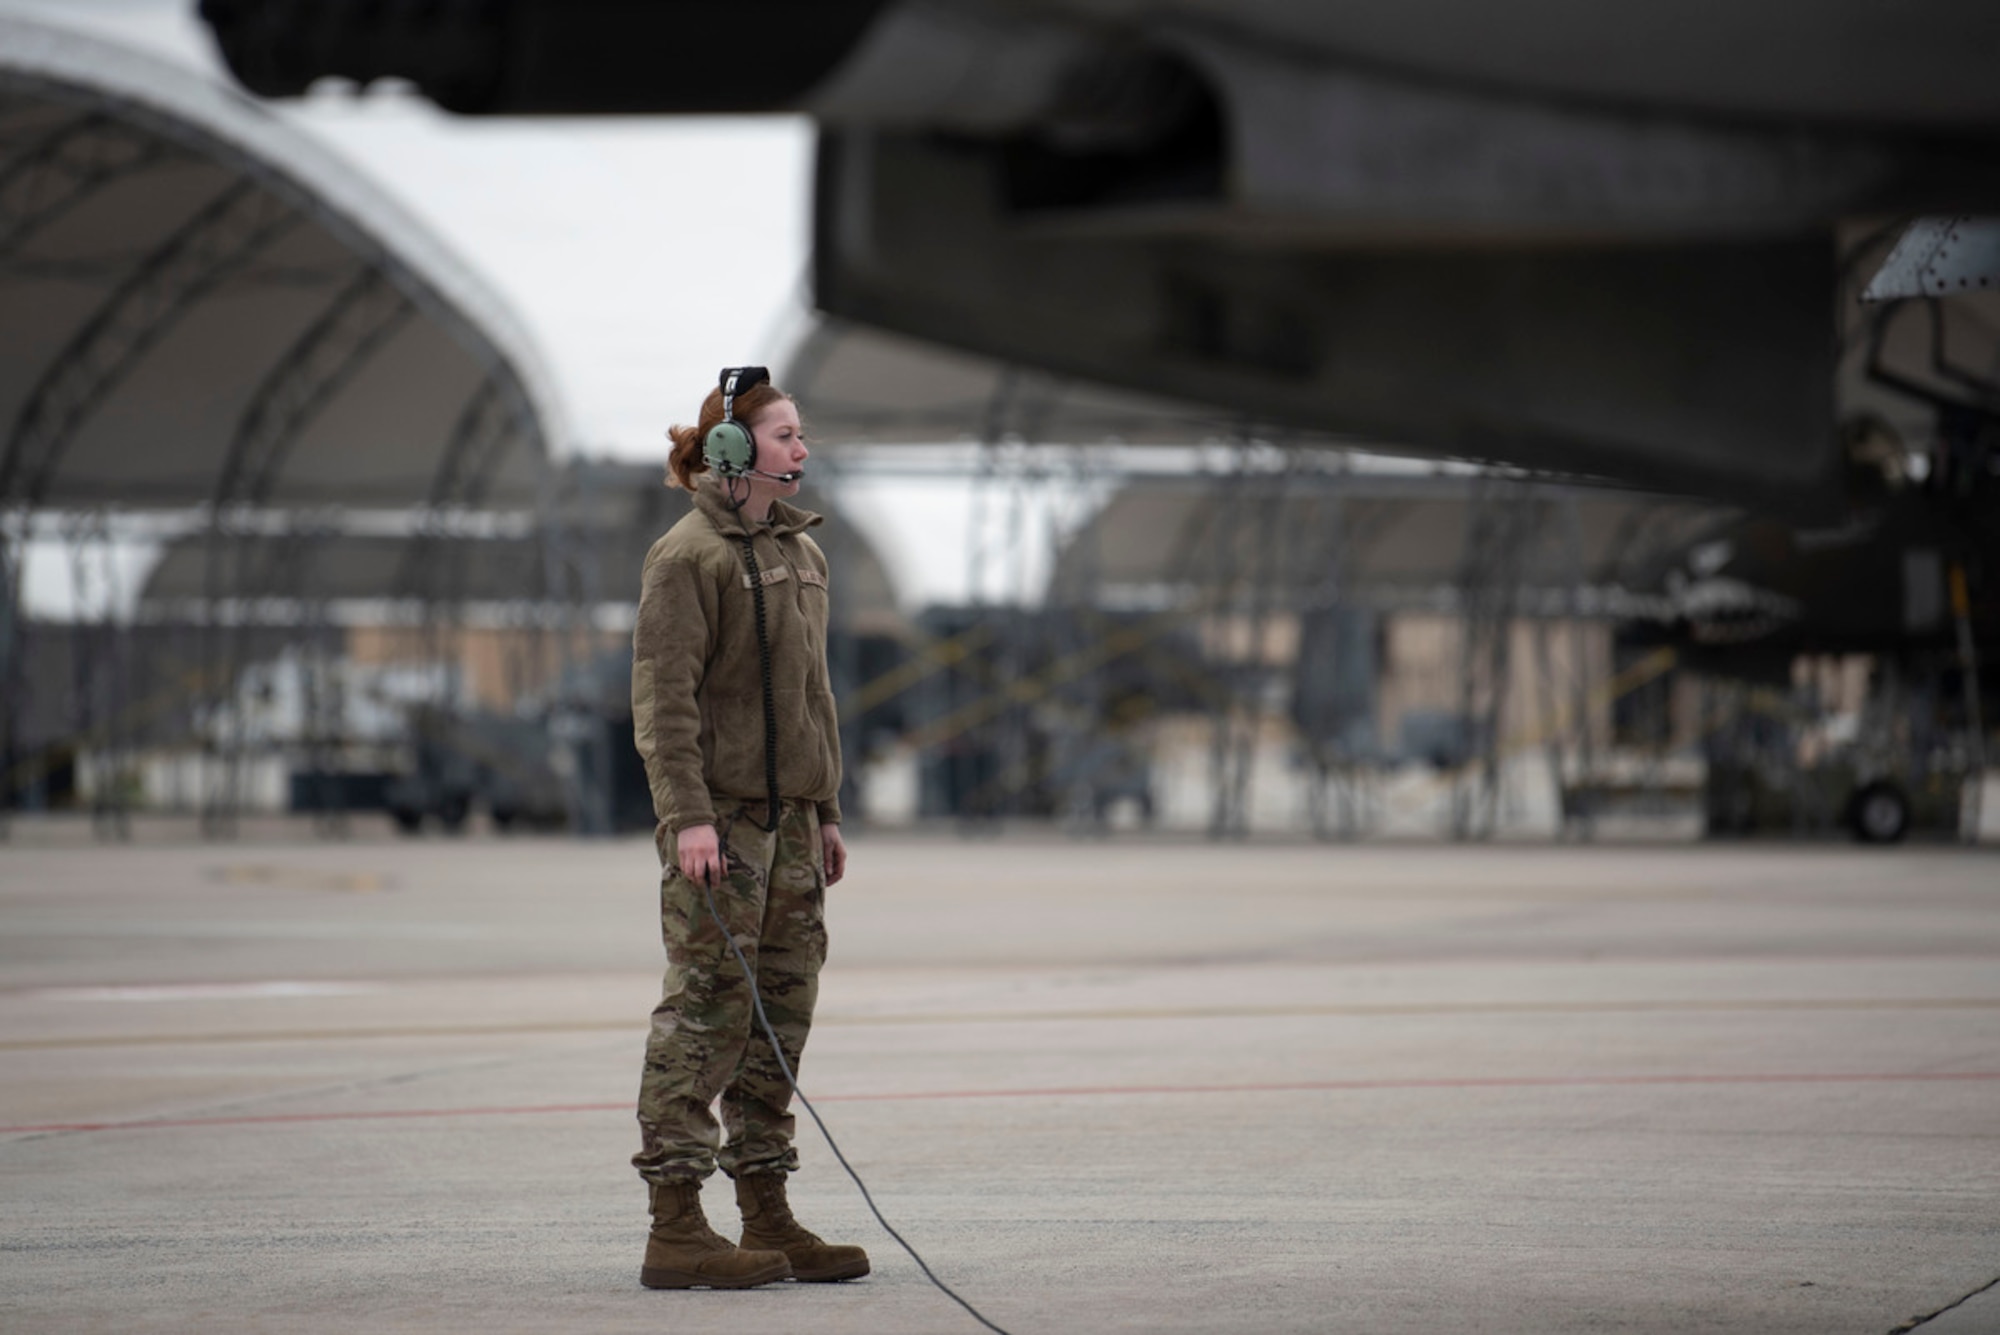 U.S. Air Force Airman Gabrielle Shipley, 74th Fighter Generation Squadron crew chief, inspects an A-10C Thunderbolt II aircraft before takeoff during Mosaic Tiger 24-1 at Moody Air Force Base, Georgia, November 13, 2023. During Mosaic Tiger 24-1, Airmen were subject to simulated attacks and disruptions to increase readiness and instill rapid decision making skills. (U.S. Air Force photo by Staff Sgt. Thomas Johns)